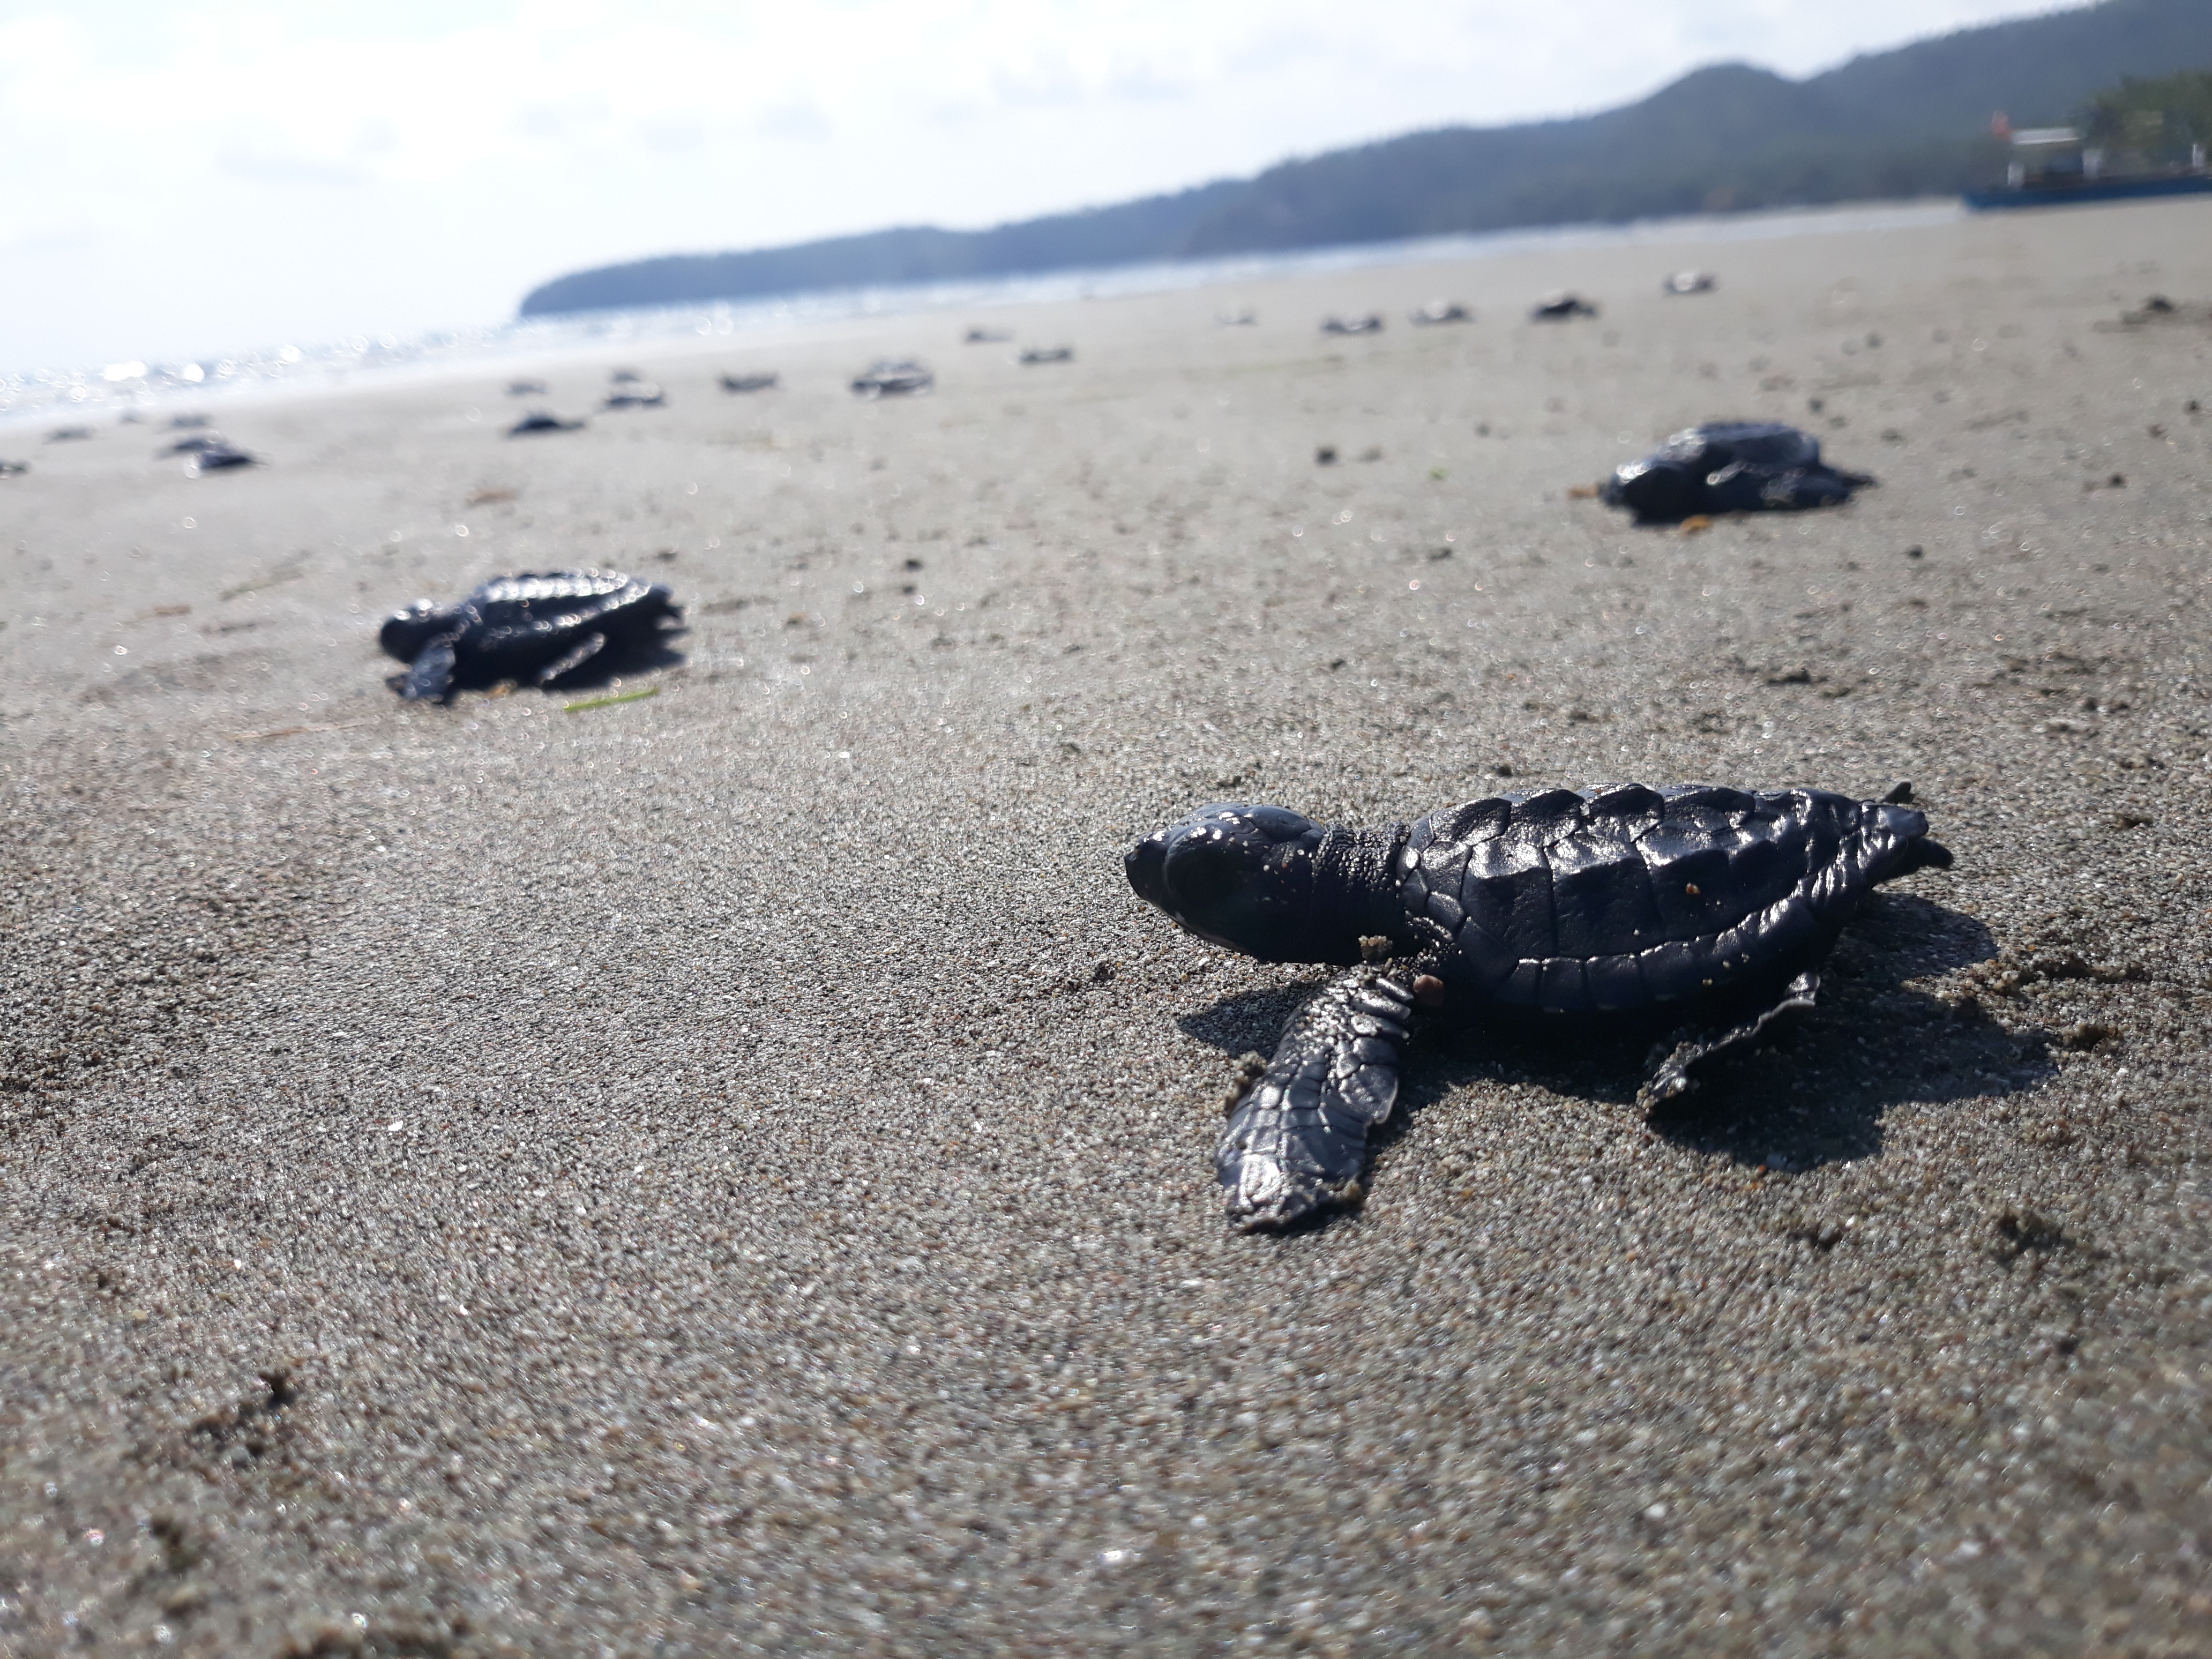 ‘May your tribe increase’: Send-off for 84 baby turtles